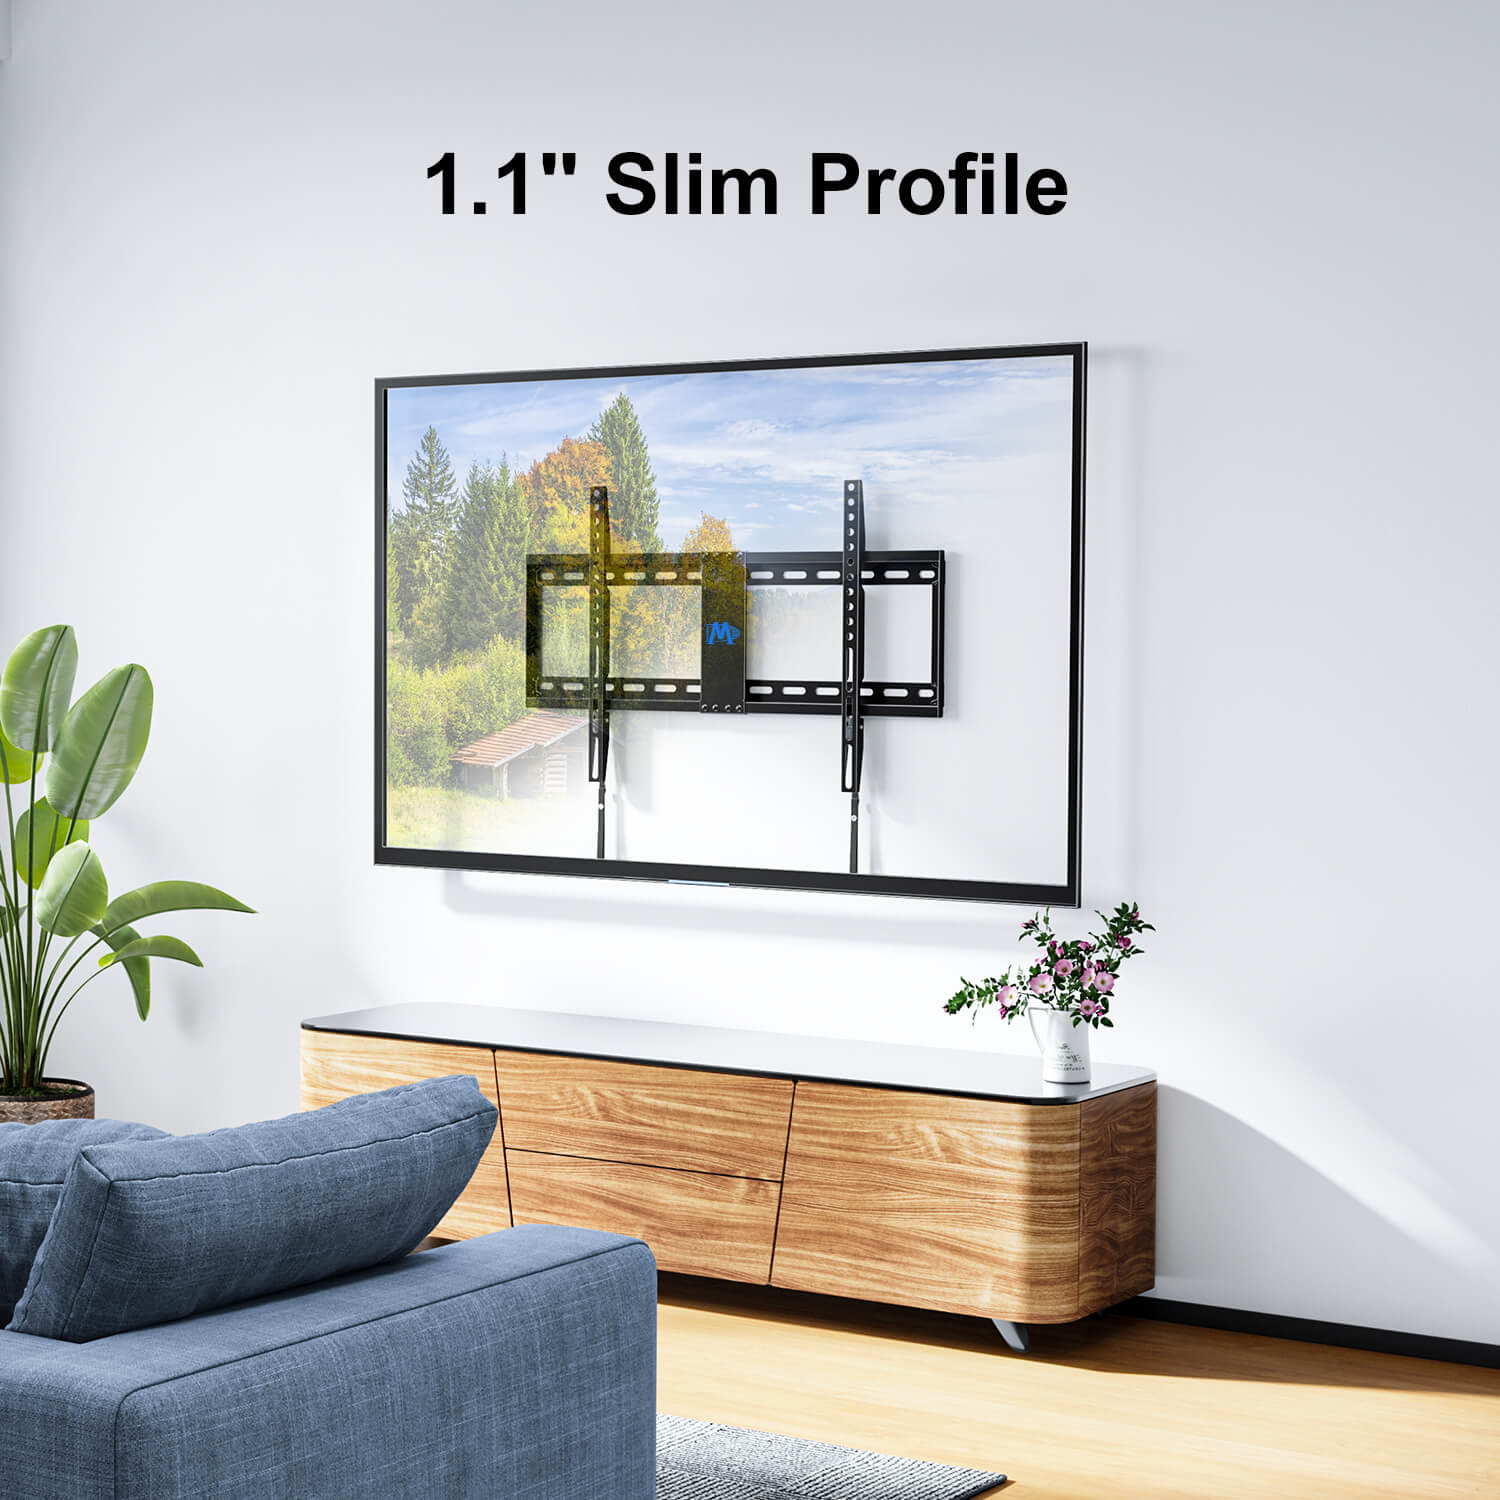 fixed tv mount with a slim 1.1'' low profile